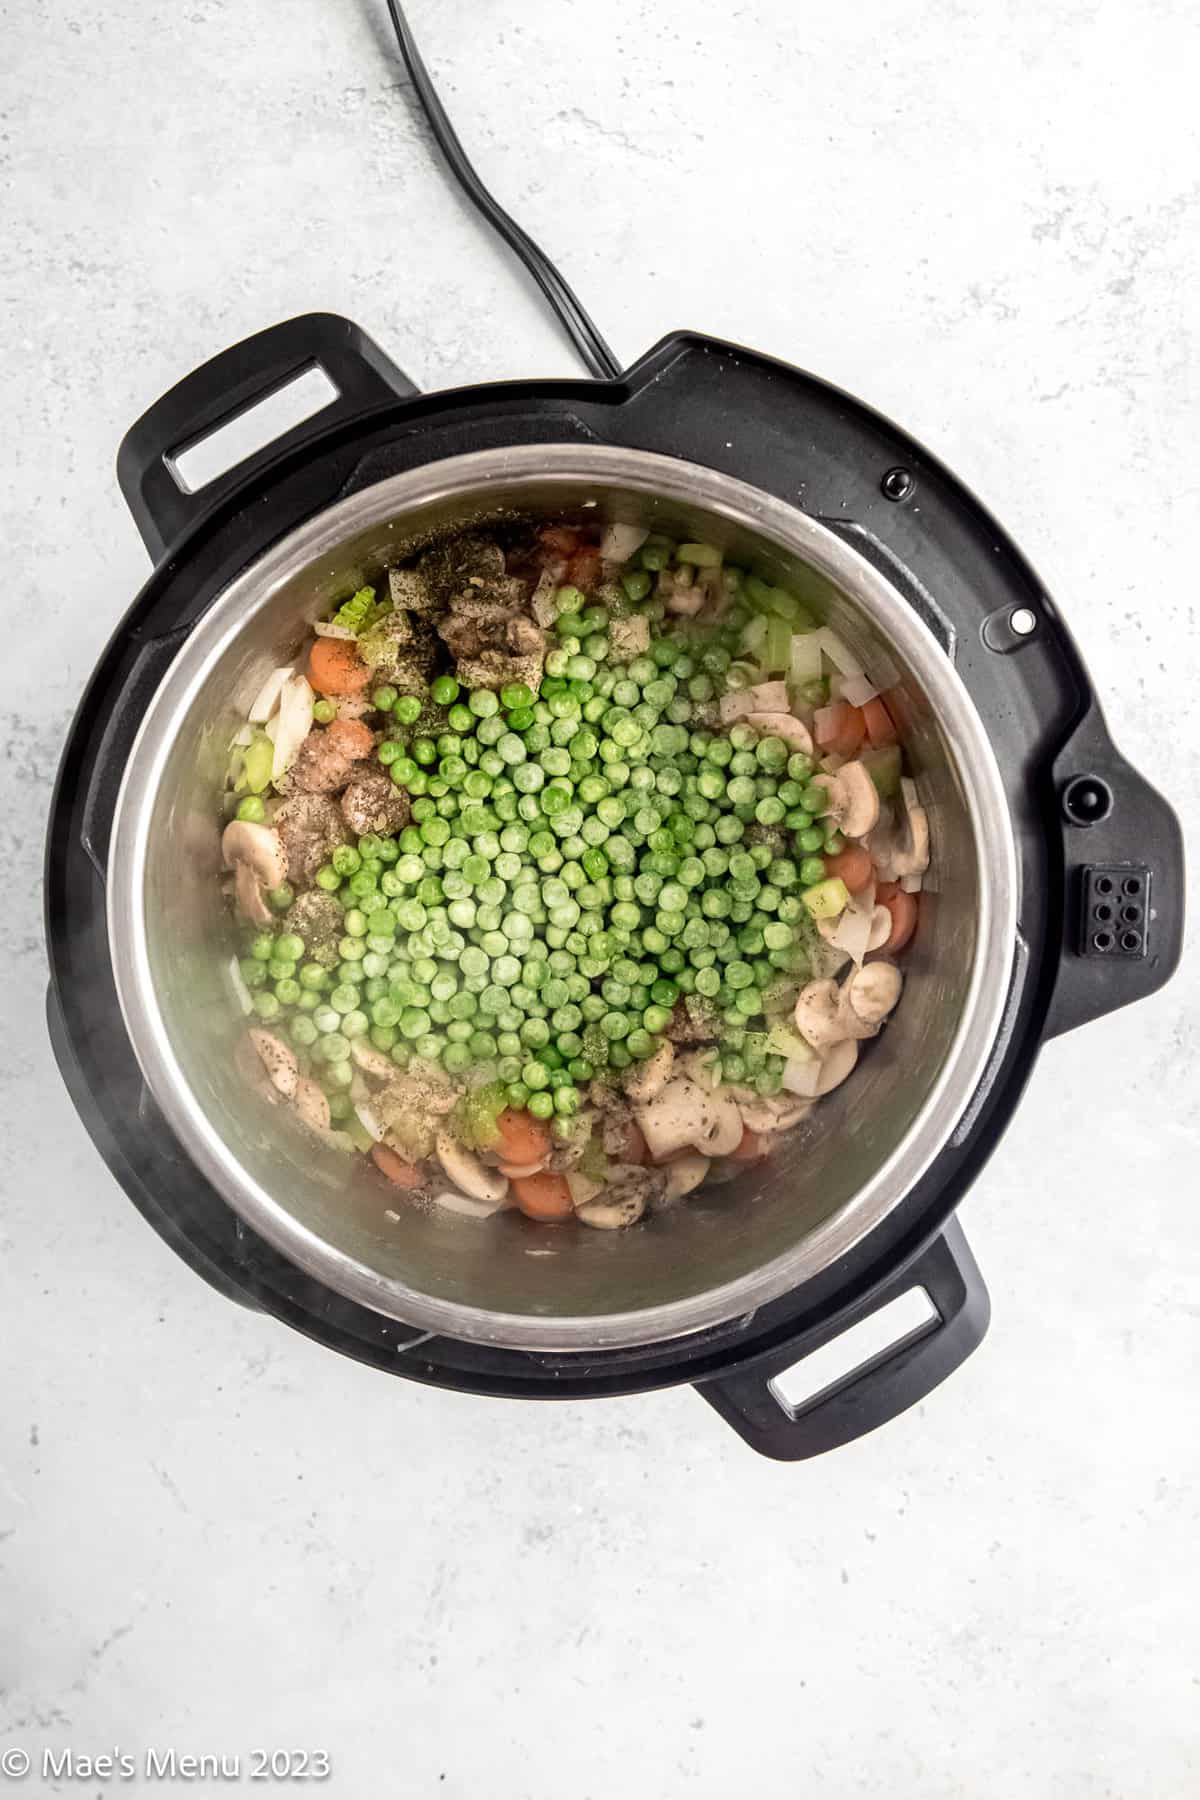 Vegetables and green peas cooking in the Instant Pot.